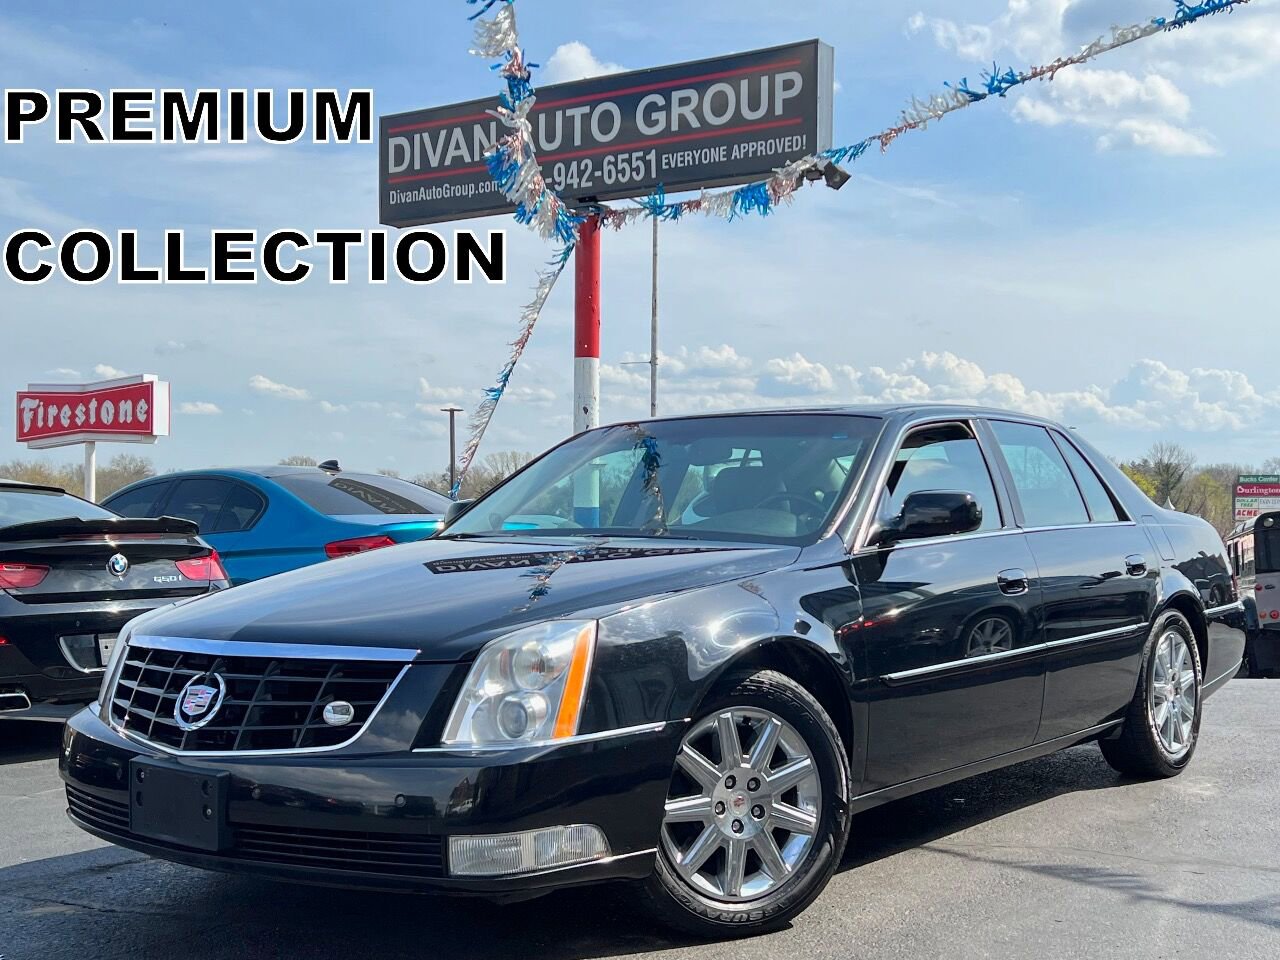 Used 2011 Cadillac DTS for Sale Right Now - Autotrader